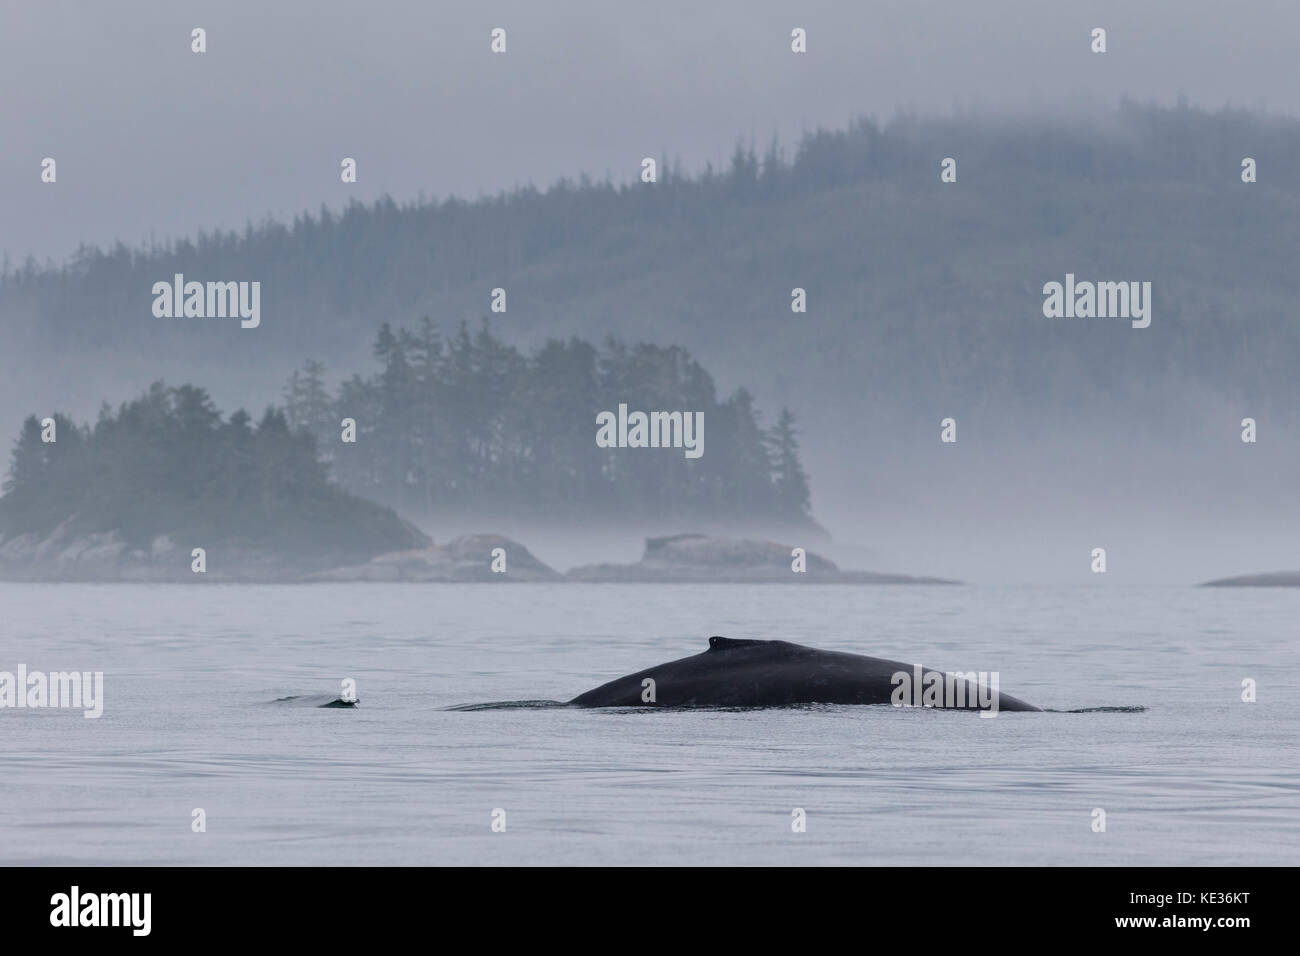 Foggy morning with a humpback whale in front of little island of the Broughton Archipelago Provincial Marine Park off Vancouver Island in British Columbia, Canada Stock Photo